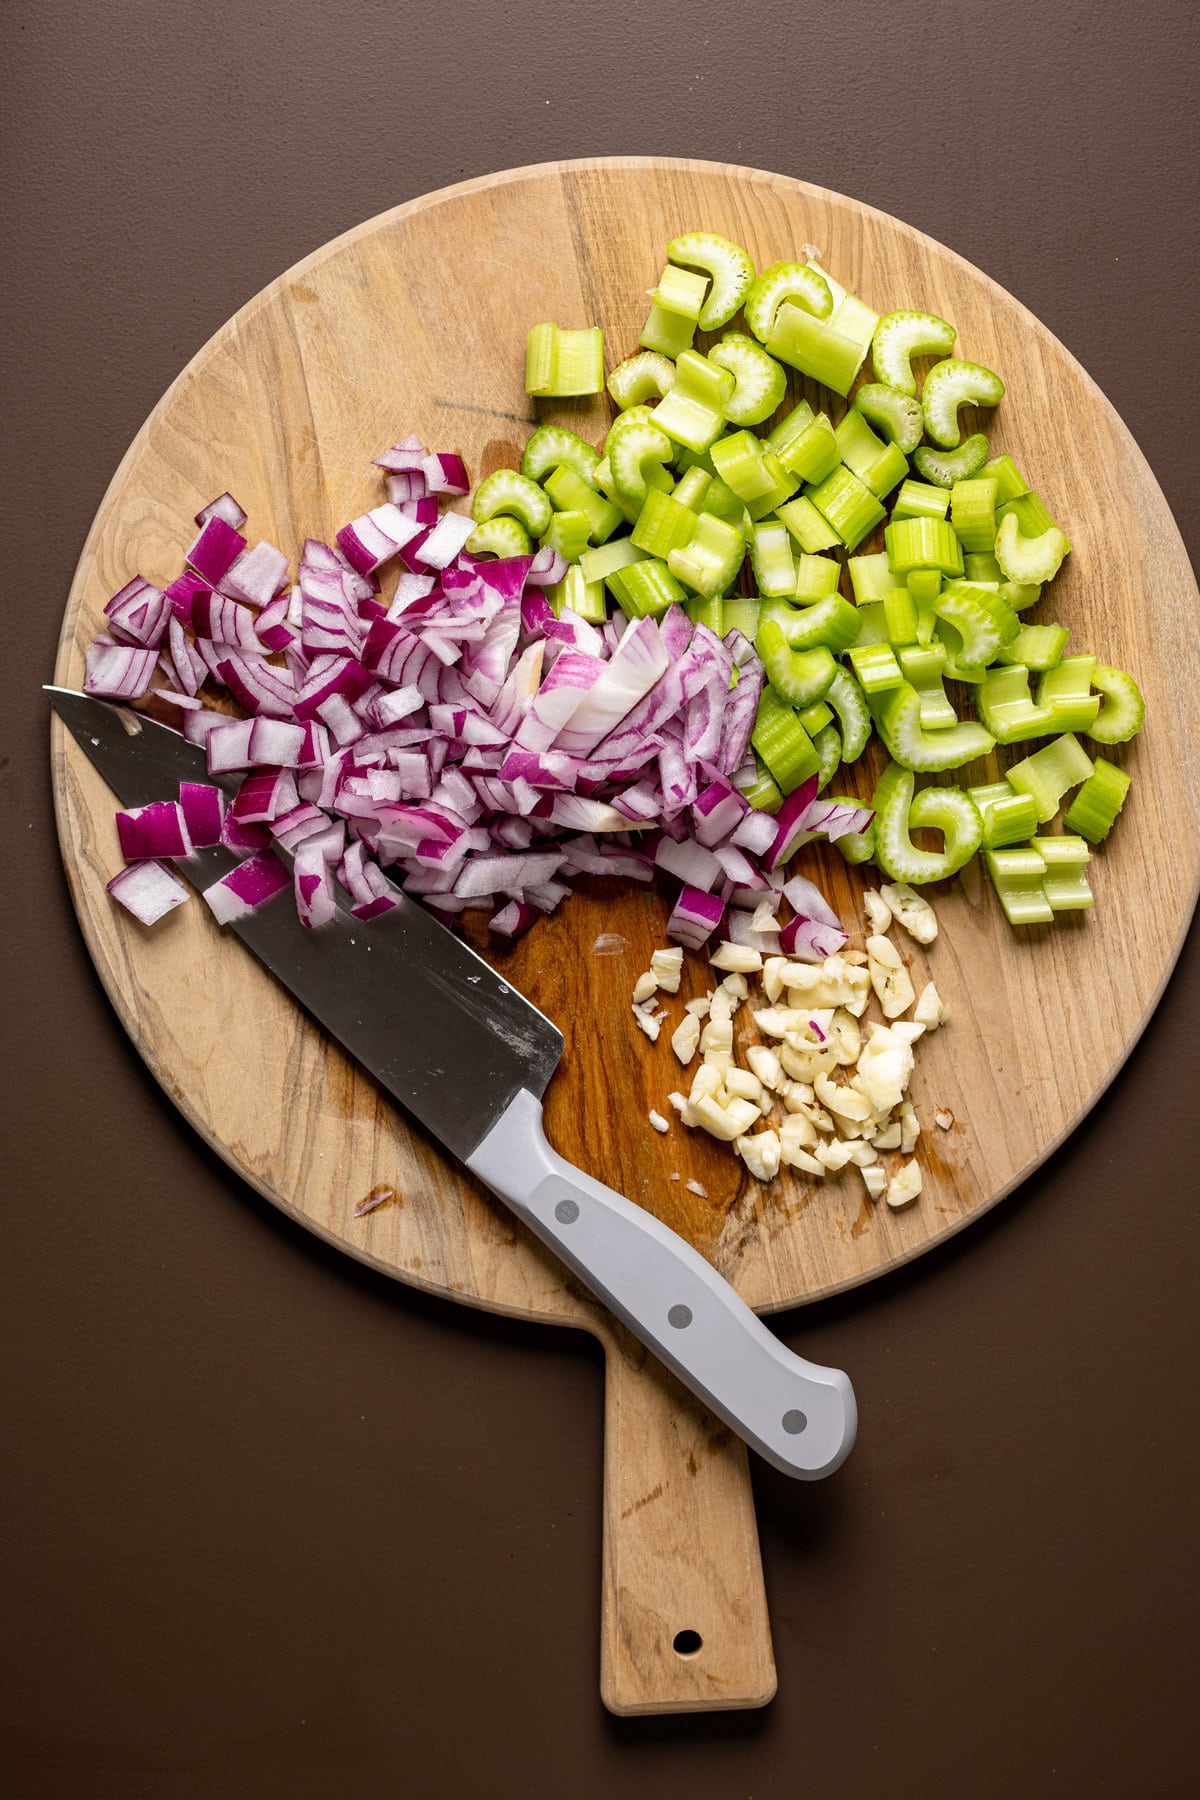 Chopped garlic, red onion, and celery on a cutting board with a knife